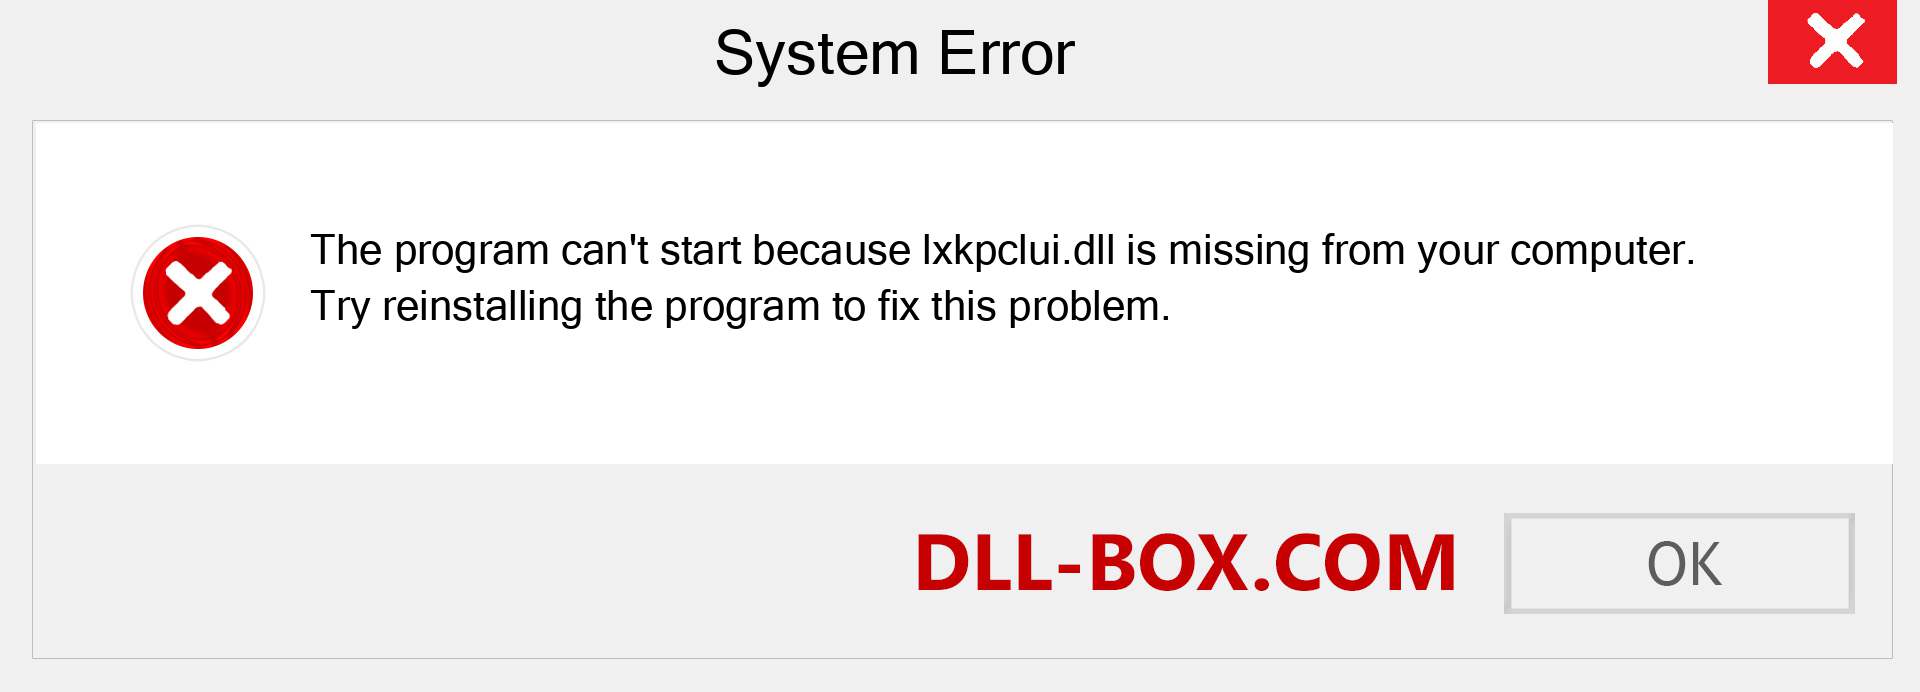  lxkpclui.dll file is missing?. Download for Windows 7, 8, 10 - Fix  lxkpclui dll Missing Error on Windows, photos, images